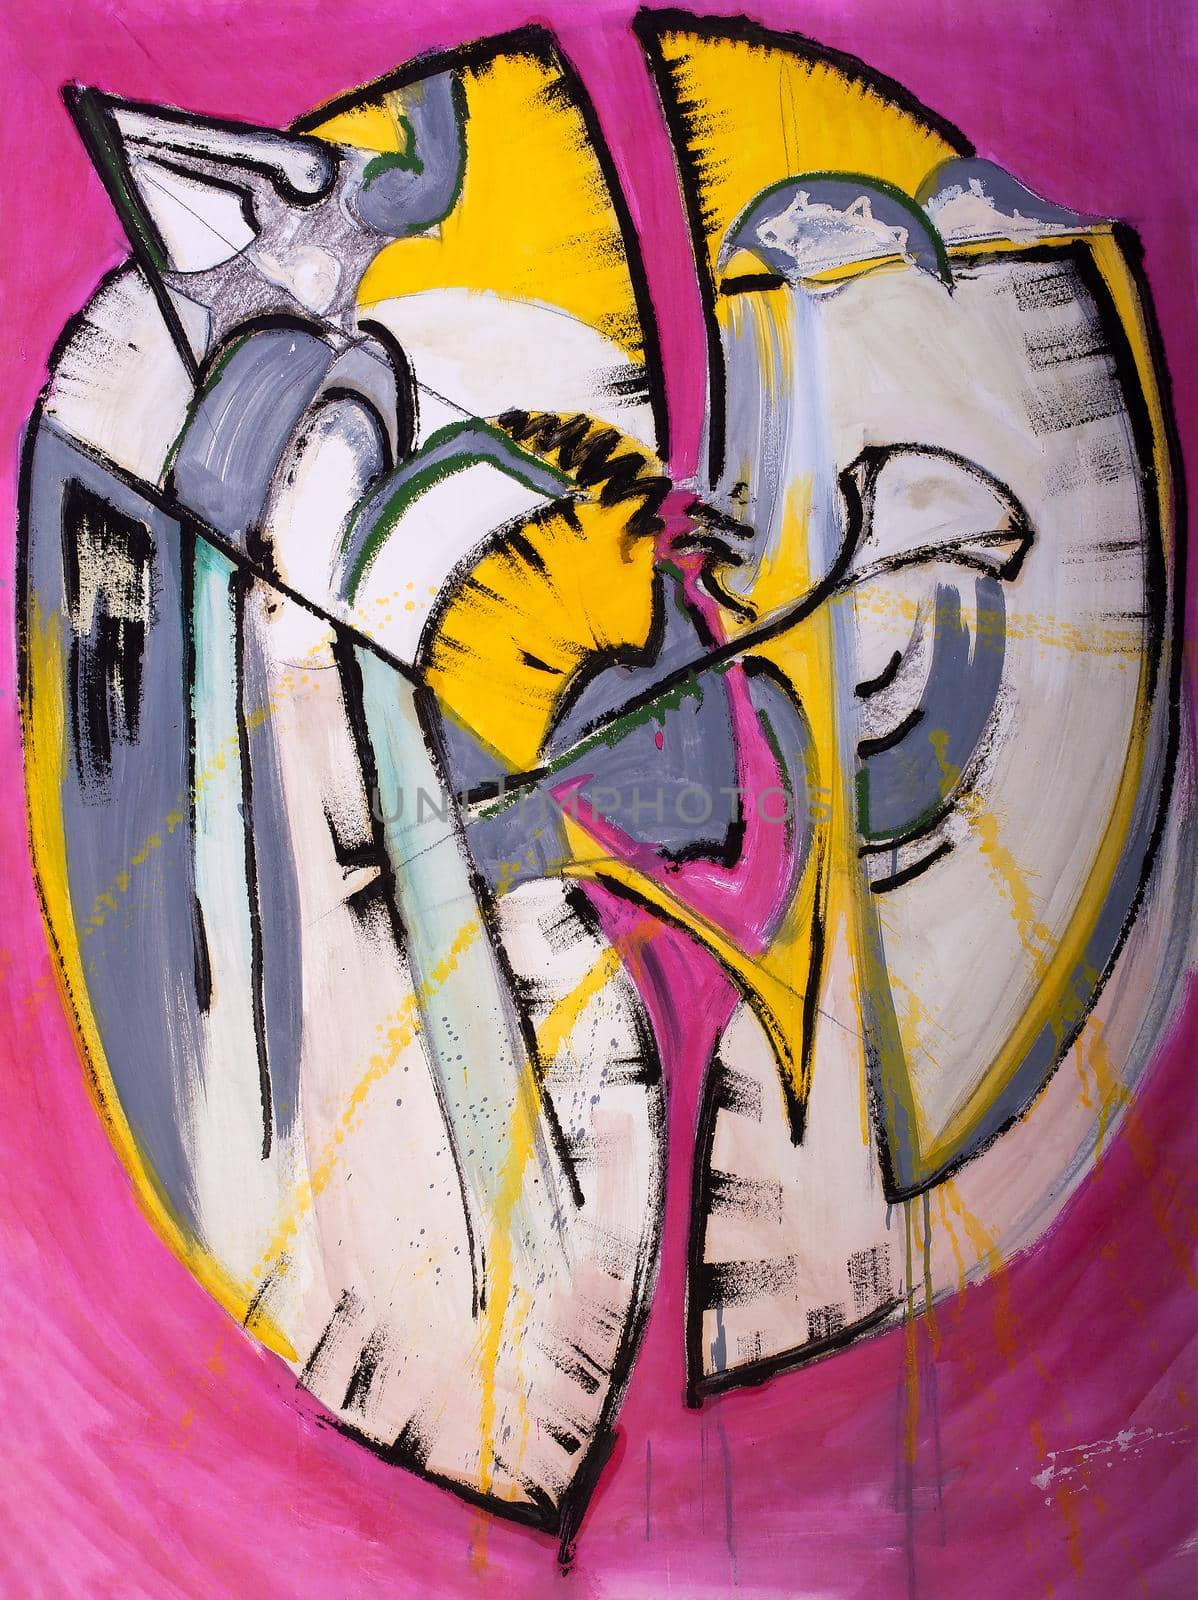 Abstract painting, mixed media. Decoration made with fuchsia, yellow, white and gray colors by bepsimage